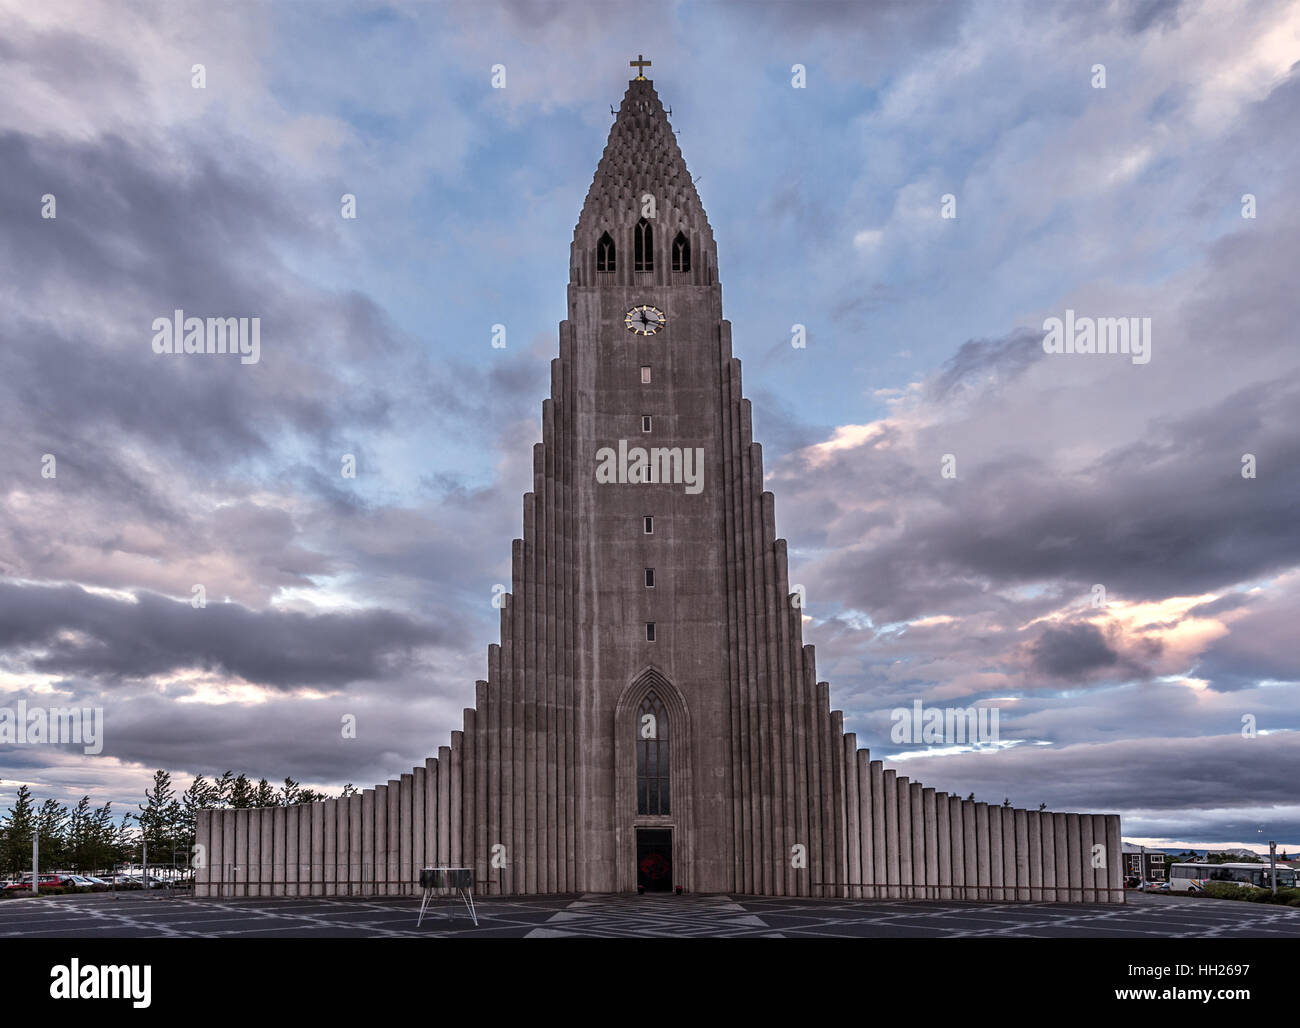 Hallgrímskirkja is a Lutheran parish church in Reykjavík, Iceland. At 73 metres high it is the largest church in Iceland. Stock Photo